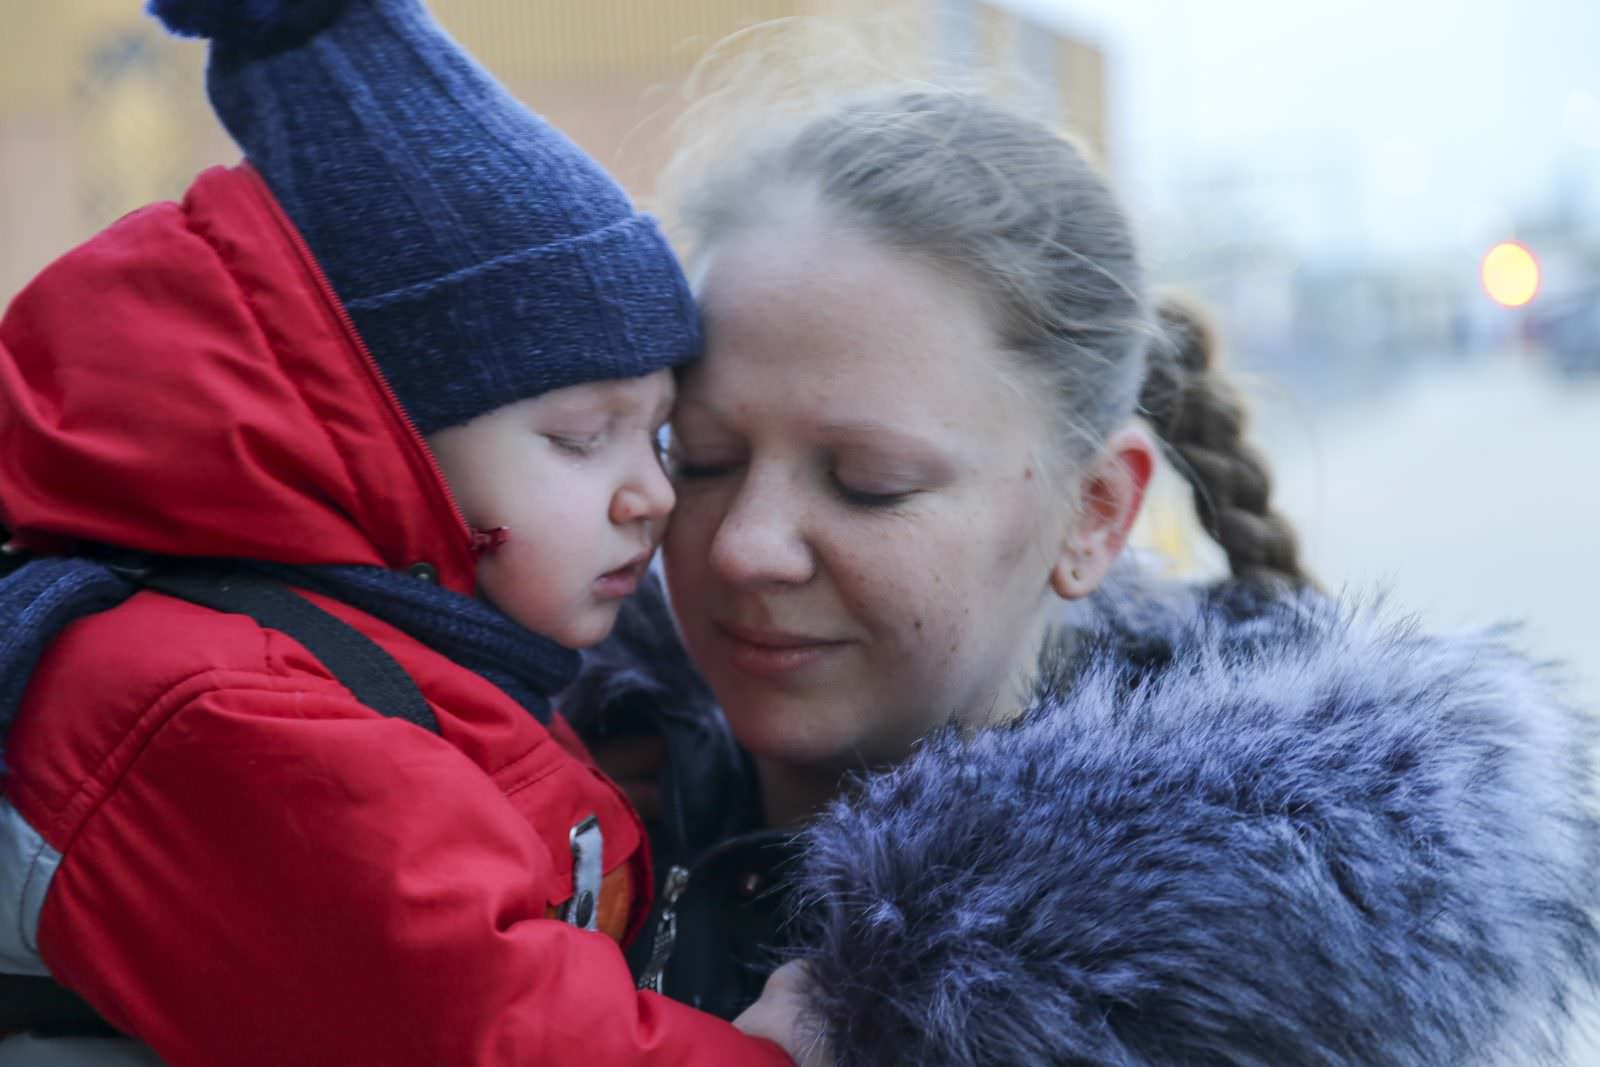 Sveta Makarenko and her 18-month-old son Nikolai were among more than 200 refugees from Mykolaiv in southern Ukraine who arrived by bus at the Palanca crossing on Moldova’s border with Ukraine. UNHCR, Moldovan officials and partner organisations provided support, information and transportation. ; Since the beginning of the war in Ukraine on 24 February 2022, more than 430,000 refugees have crossed the border into Moldova, a small country directly south of Ukraine with a population of 2.7 million.